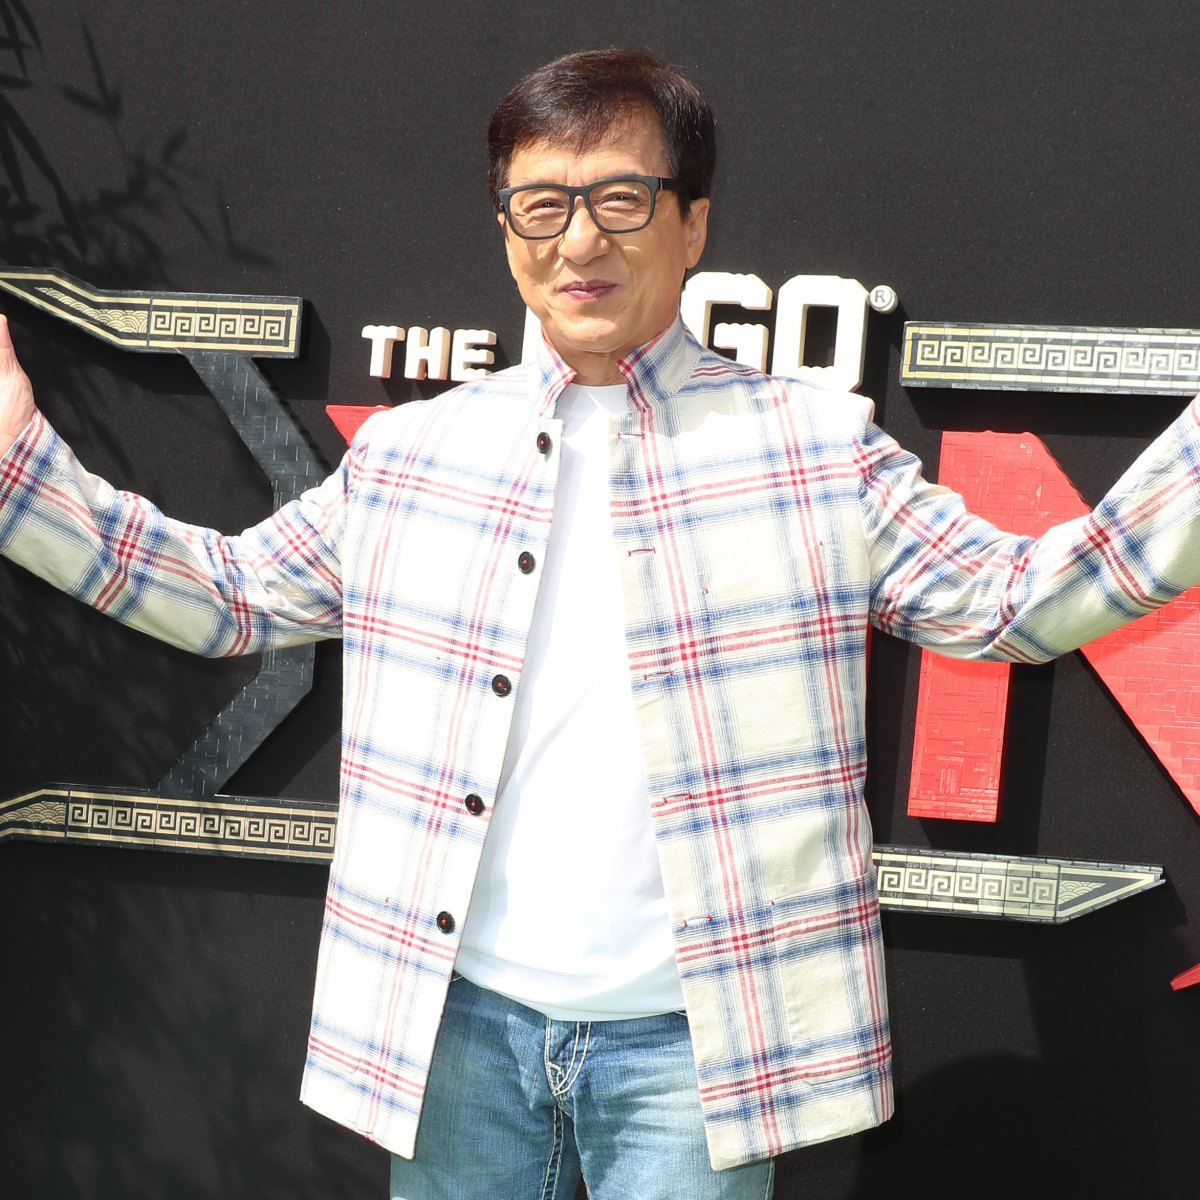 Jackie Chan Did Porn - Celebrities Who Worked in X-Rated Content Before Fame